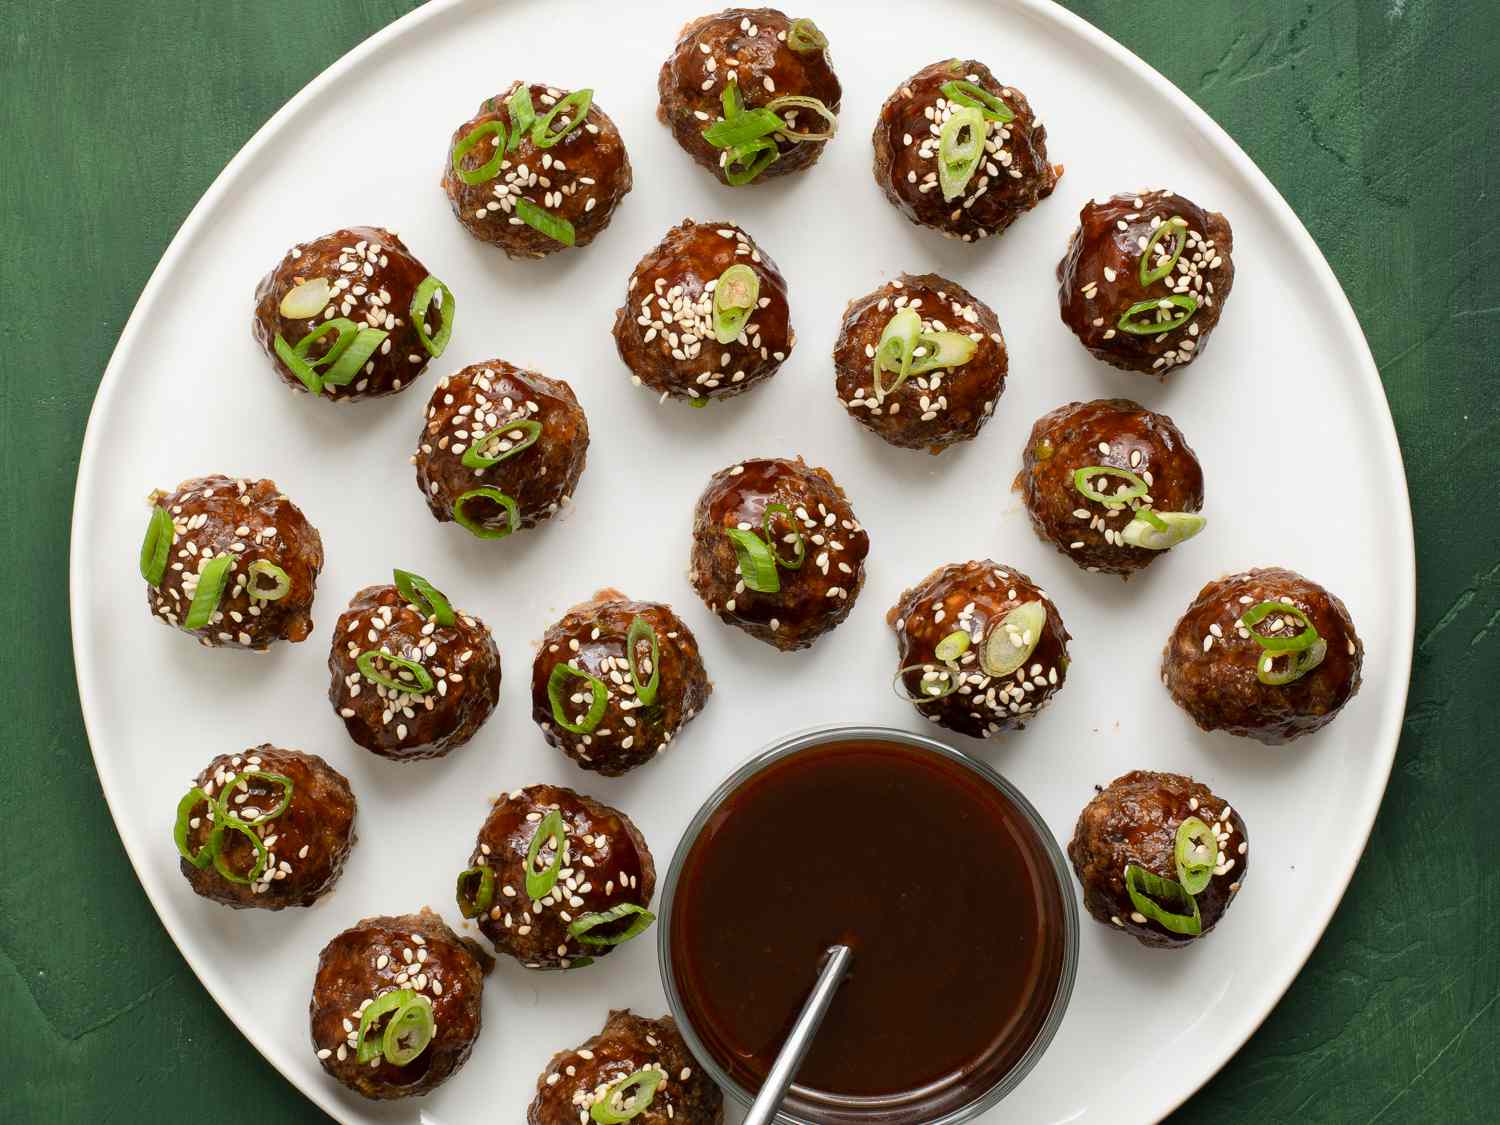 Hoisin-glazed cocktail meatballs on a white porcelain plate. There is a glass bowl of dipping sauce with a metal spoon on the plate.